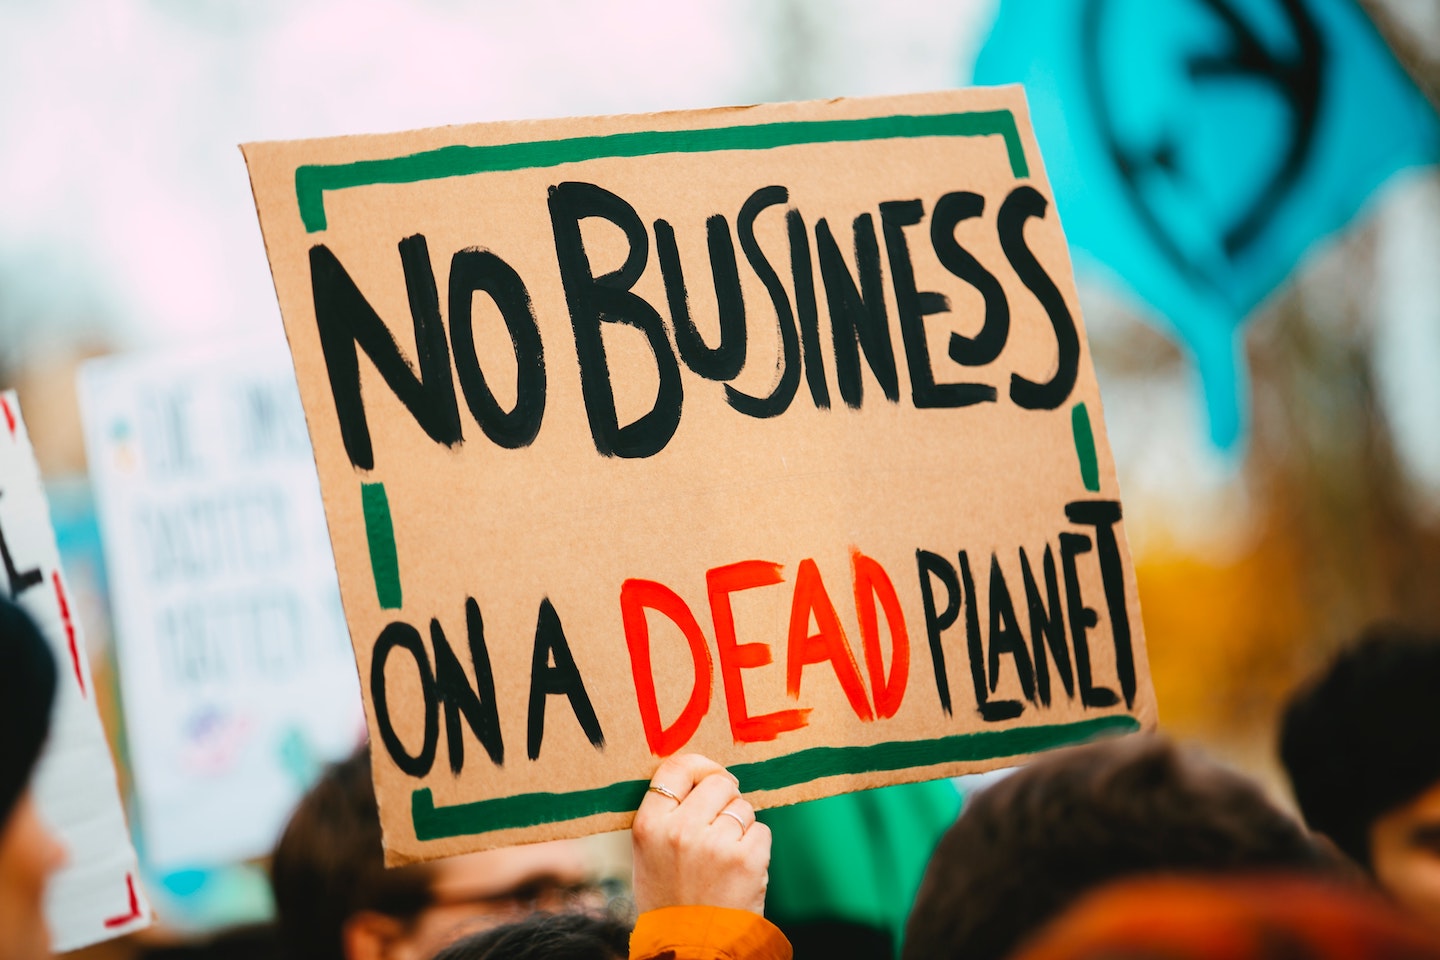 The image is of a person holding a sign that reads "No Business On A Dead Planet"